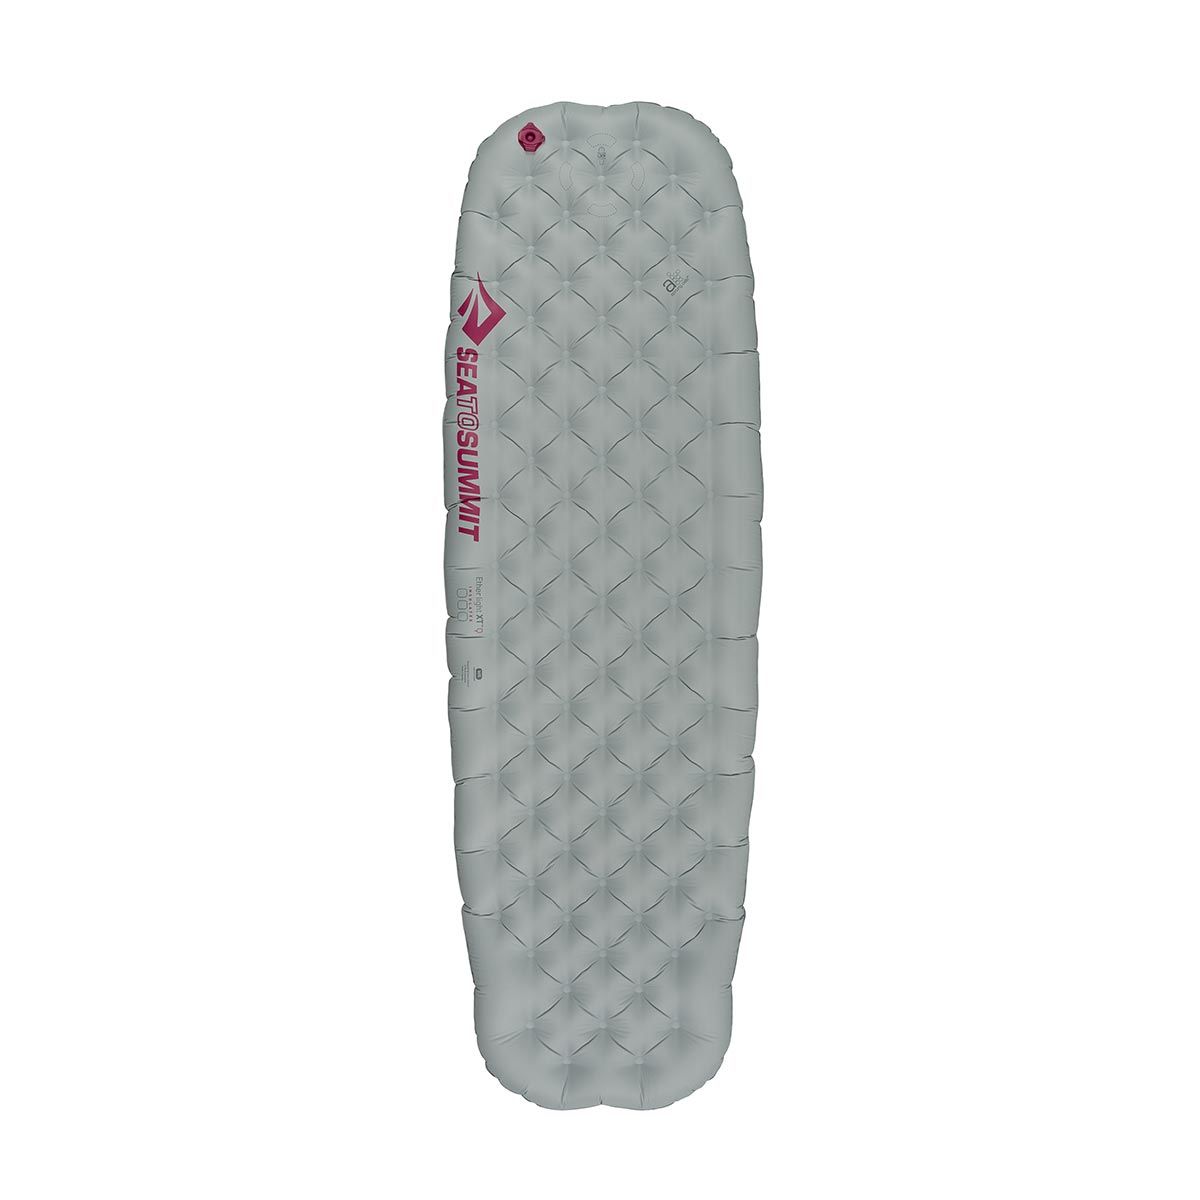 Matelas gonflable Sea to Summit Ether Light XT Insulated Femme - Regular